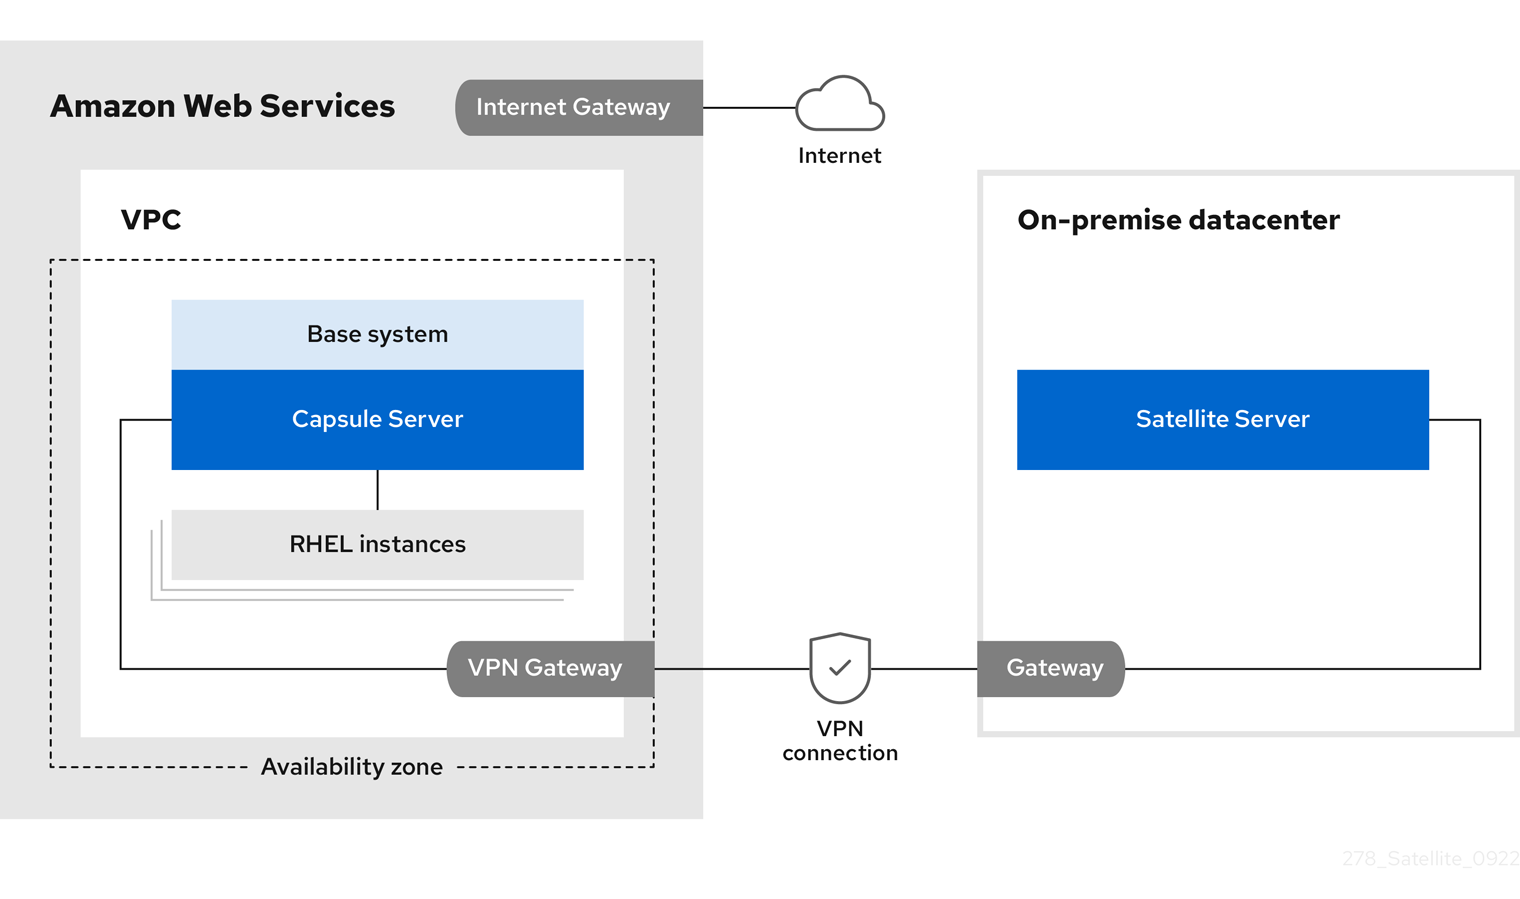 Site-to-site VPN connection between the AWS region and the on-premises datacenter